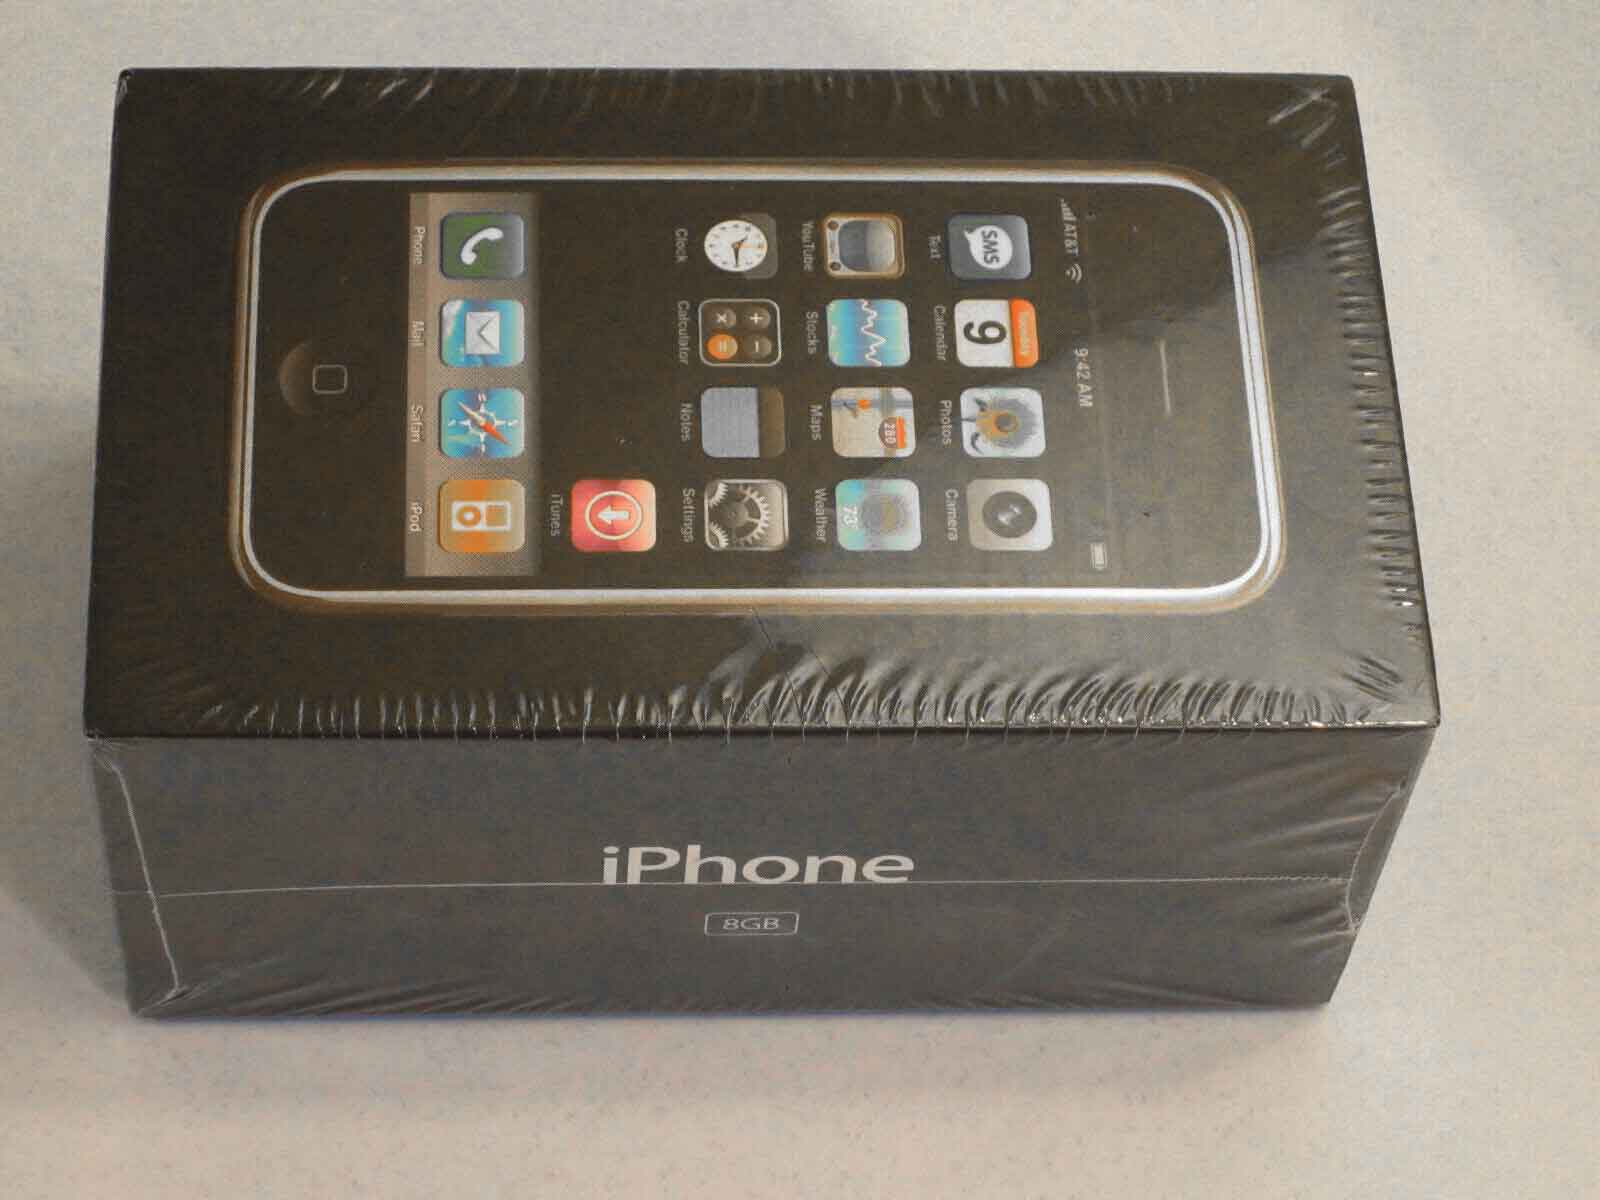 Unopened First Generation iPhone For Sale On eBay For $10,000?!